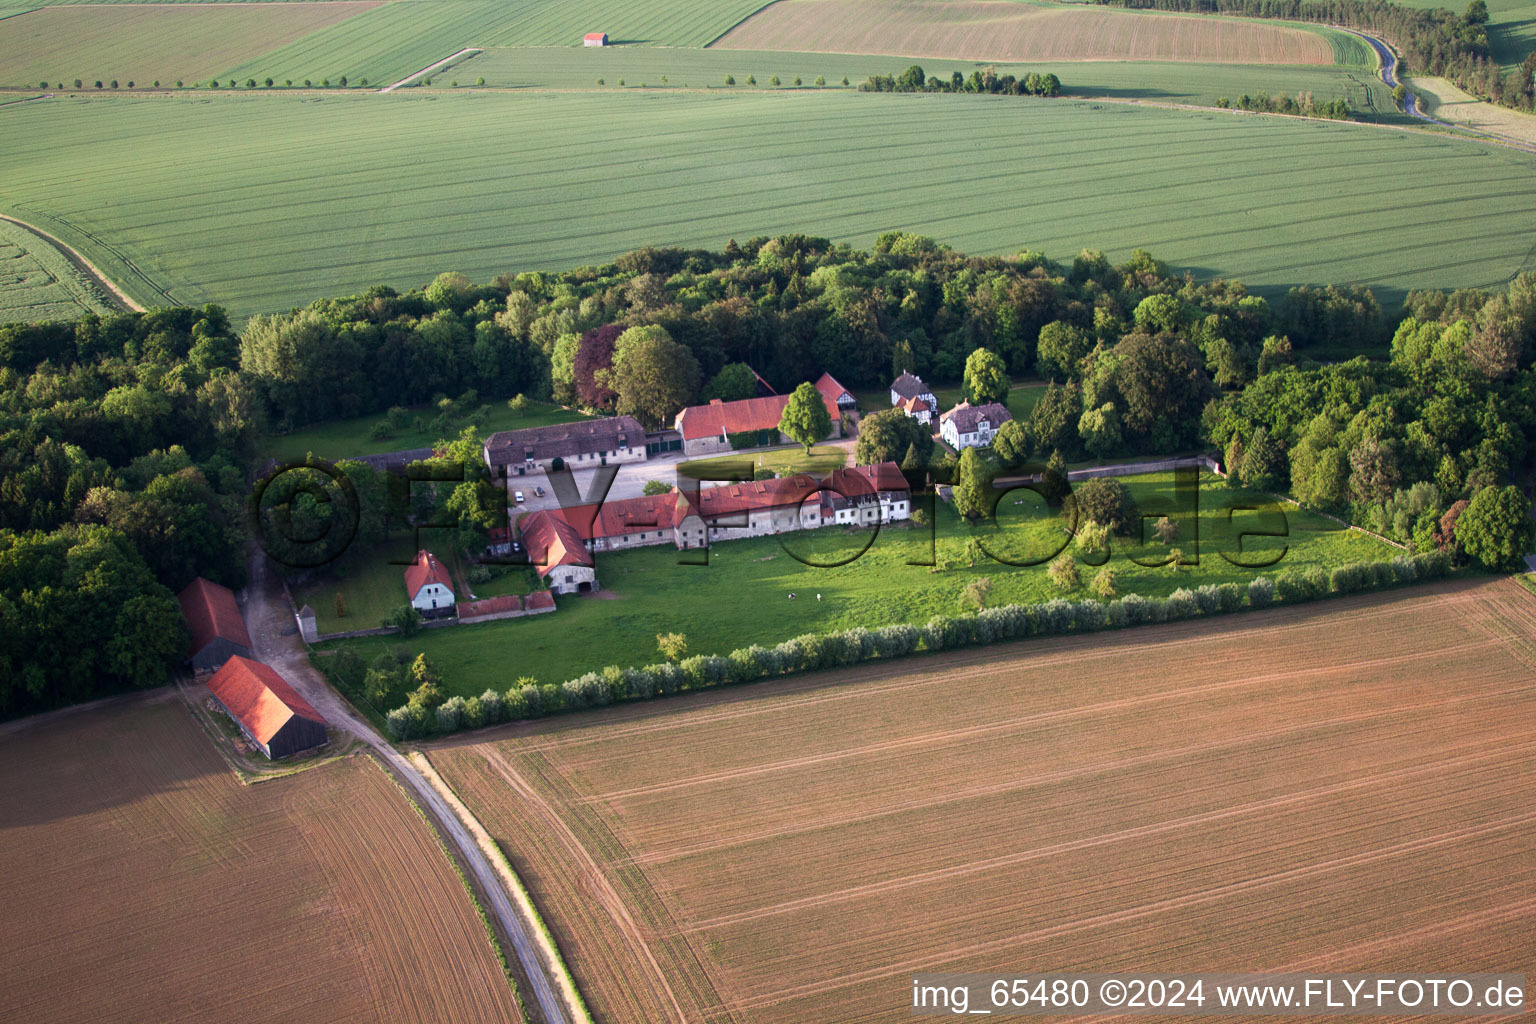 Farm on the edge of cultivated fields in the district Abbenburg in Brakel in the state North Rhine-Westphalia